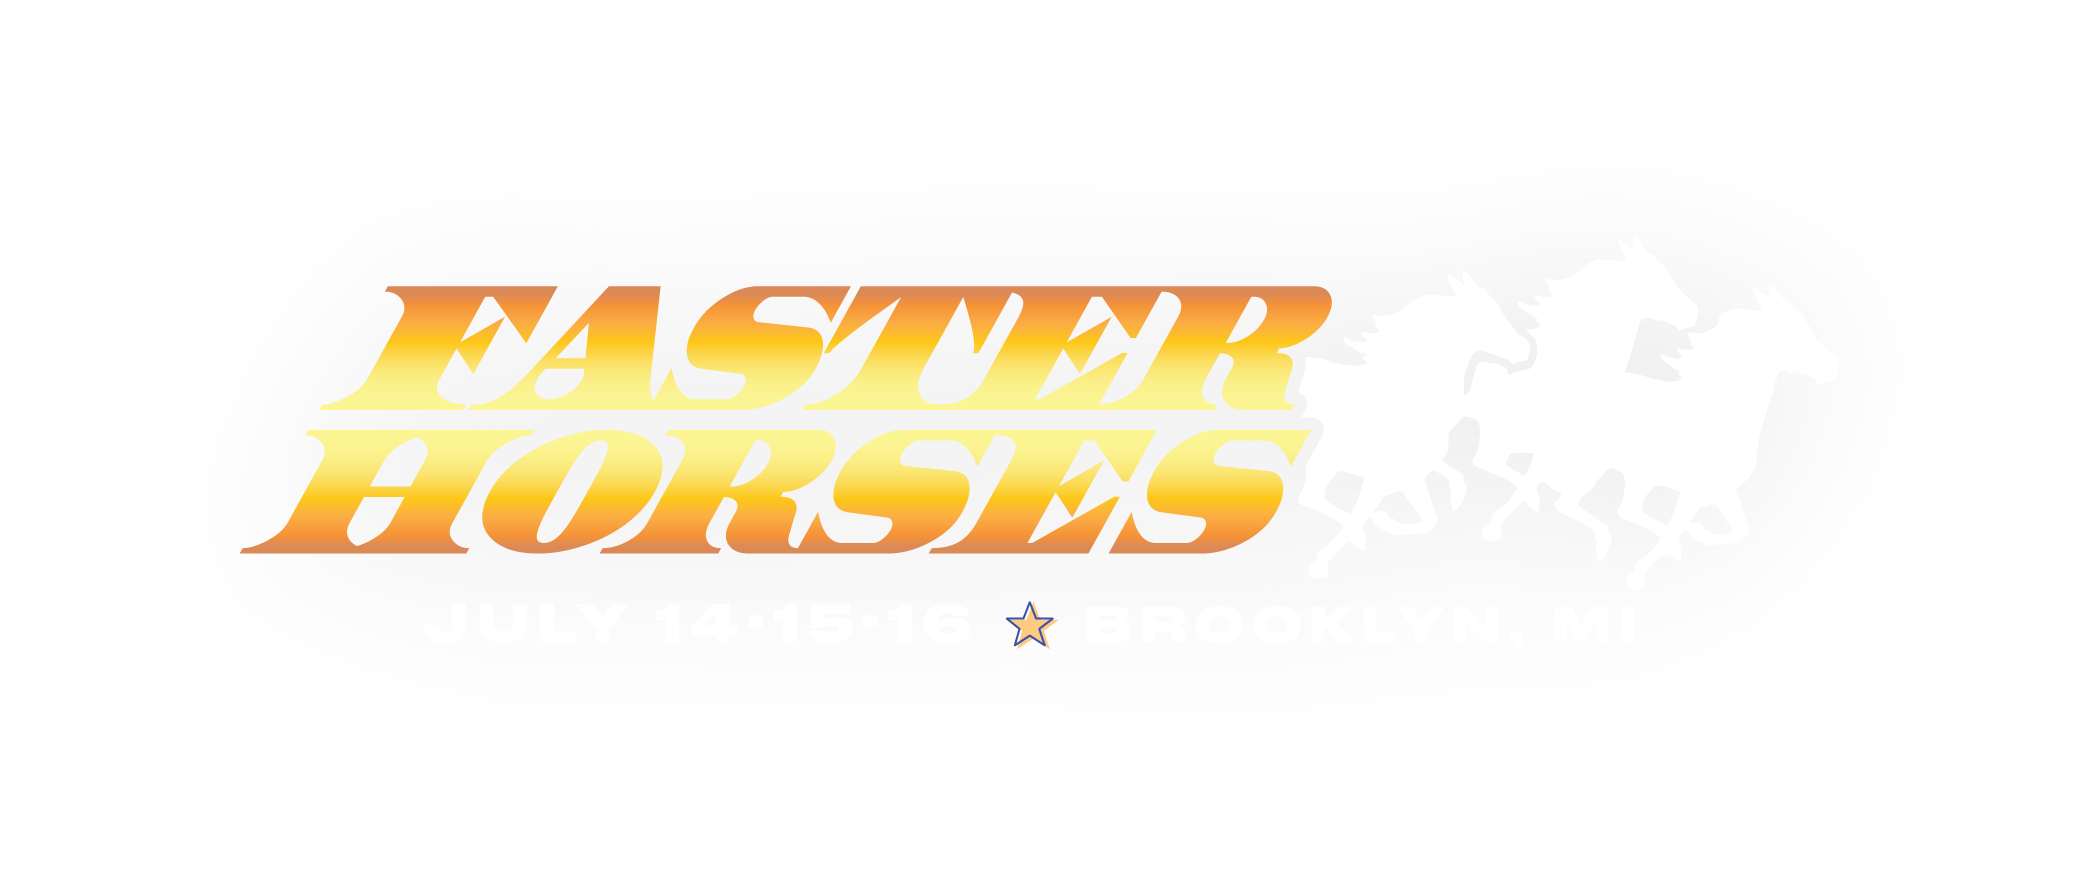 Faster Horses 2023 logo with dates (July 14, 15, 16) and location (Brooklyn, MI)